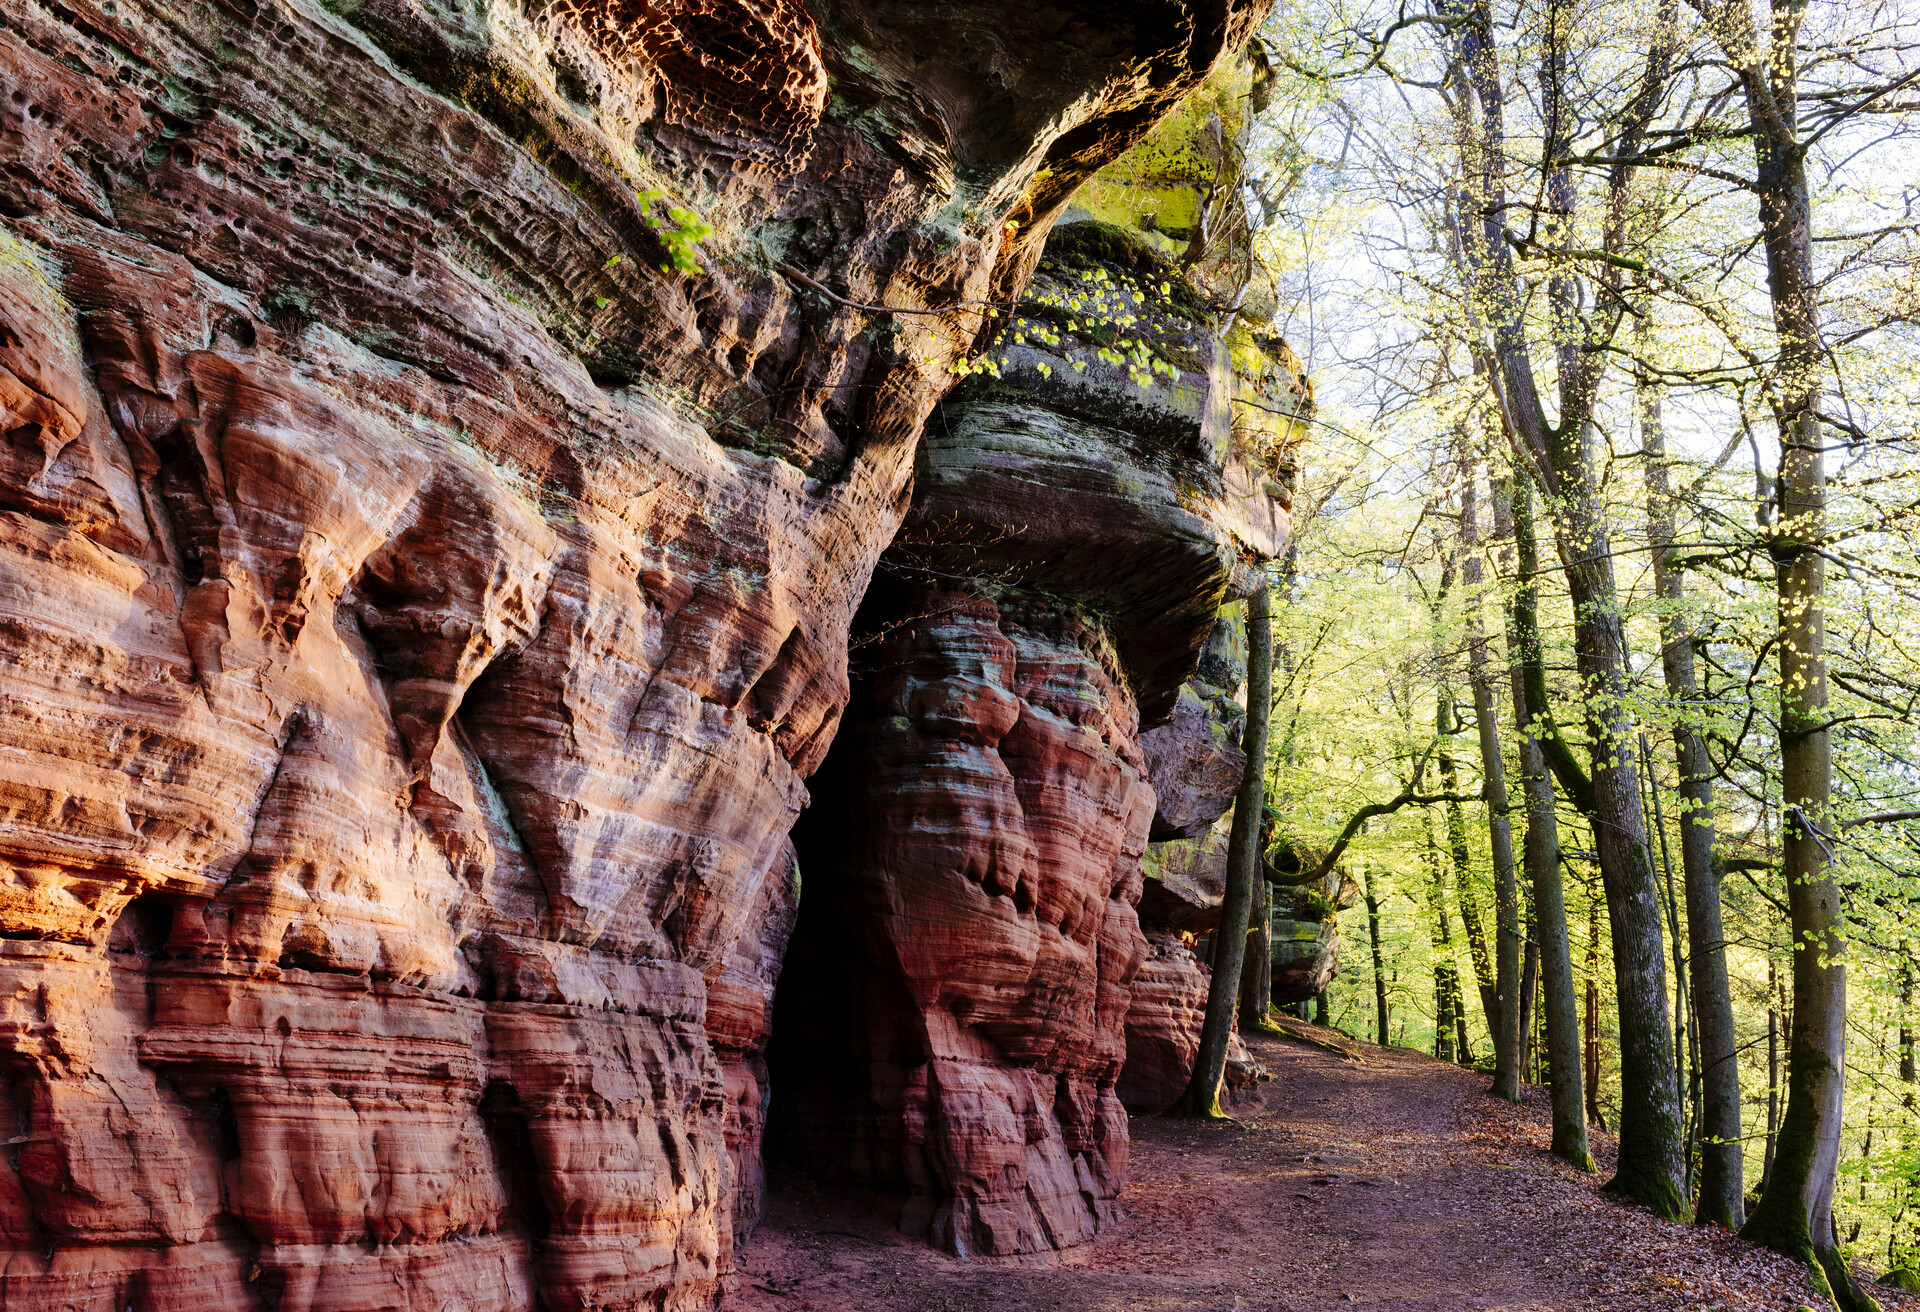 Trail along a massive Sandstone Wall.Altschlossfelsen near Eppenbrunn, Rhineland- Palatinate, Germany, Europa; Shutterstock ID 555846853; Purchase Order: SF-06928905; Job: ; Client/Licensee: ; Other: